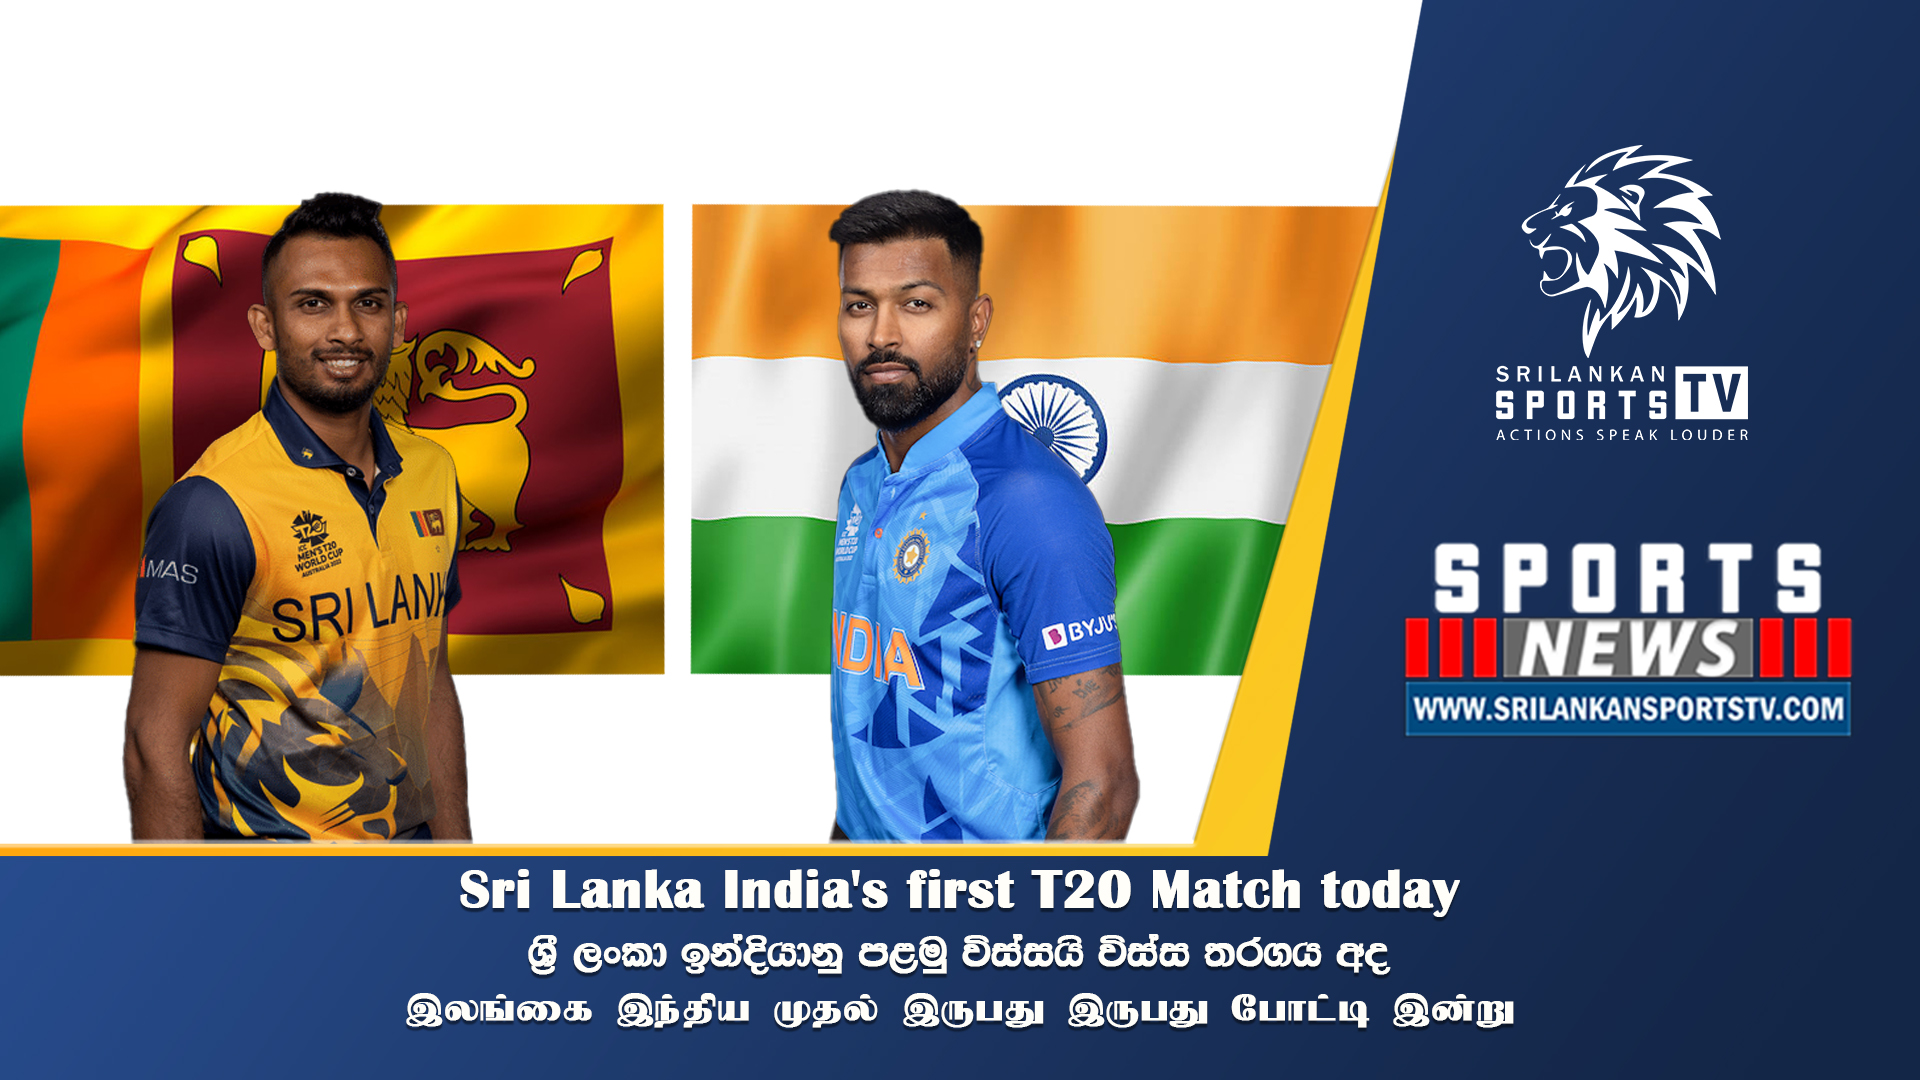 Sri Lanka India’s first T20 Match today